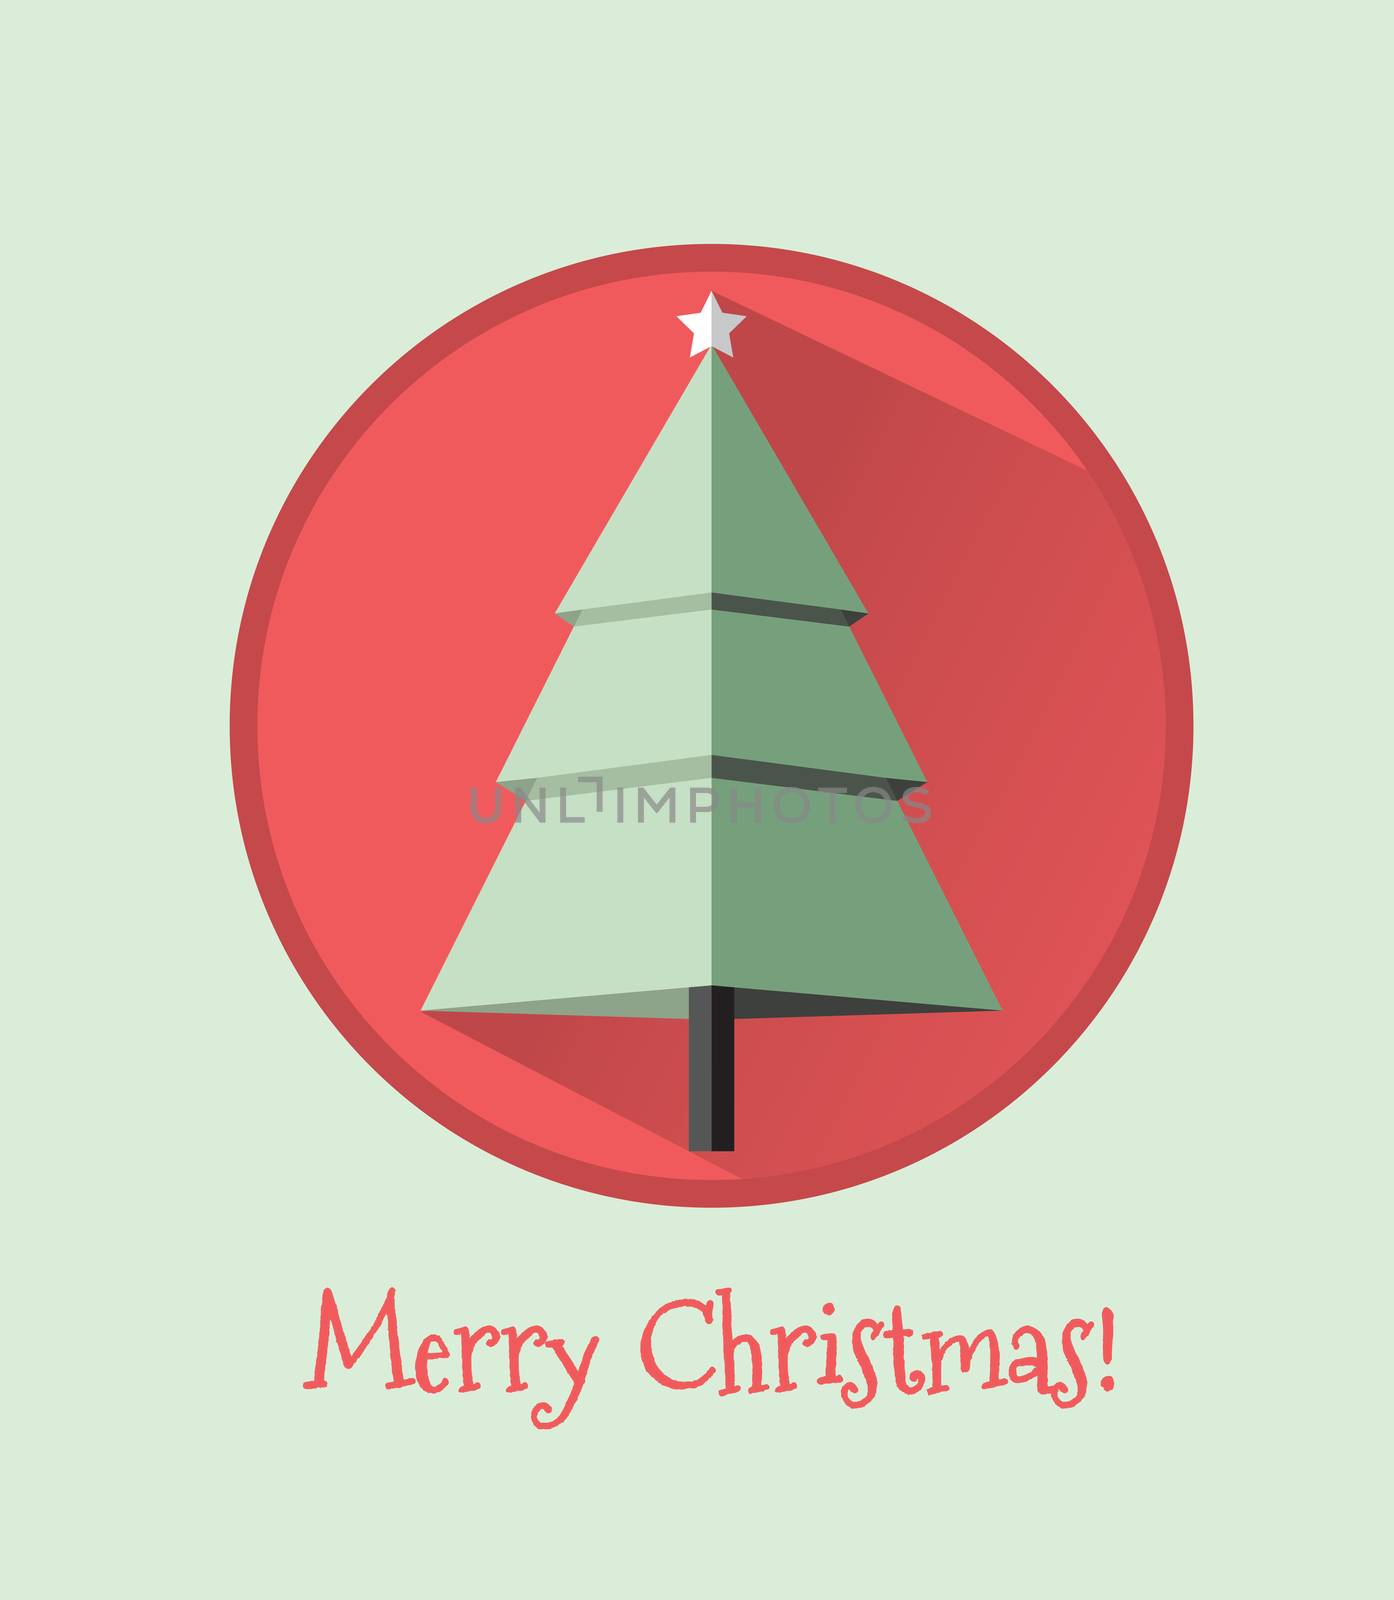 Flat design Christmas card by Zzoplanet